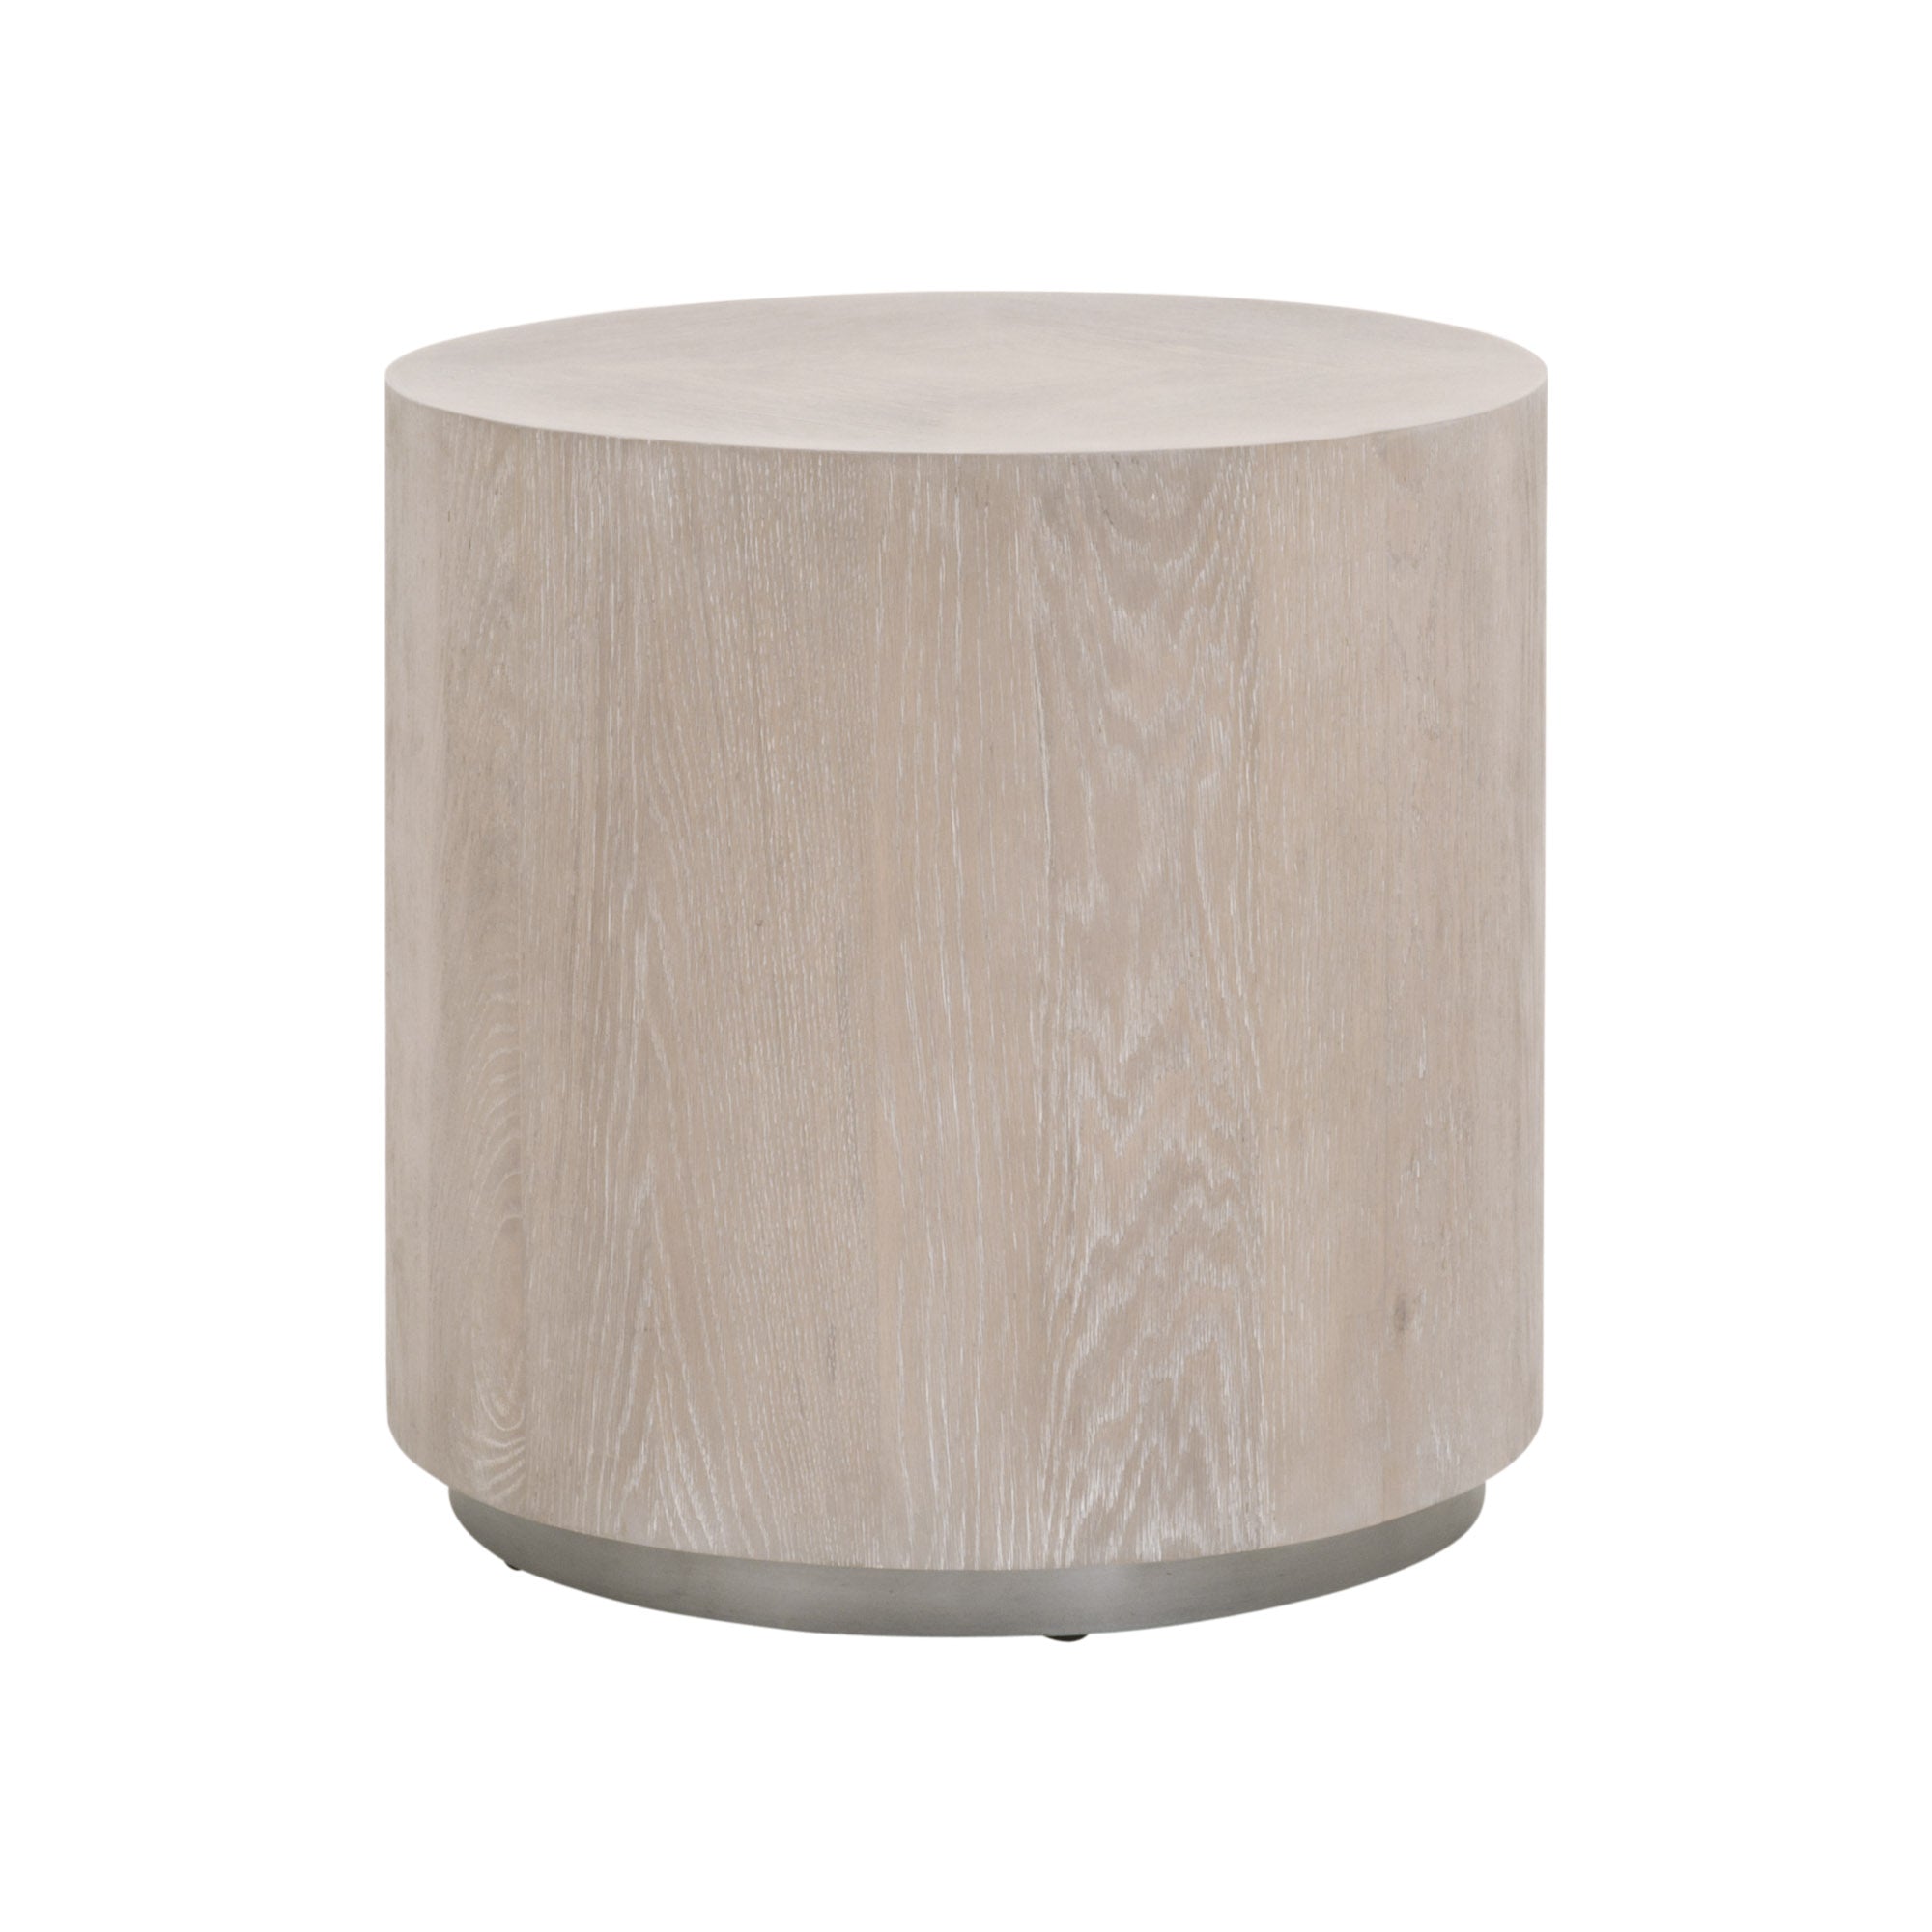 Roto Large End Table